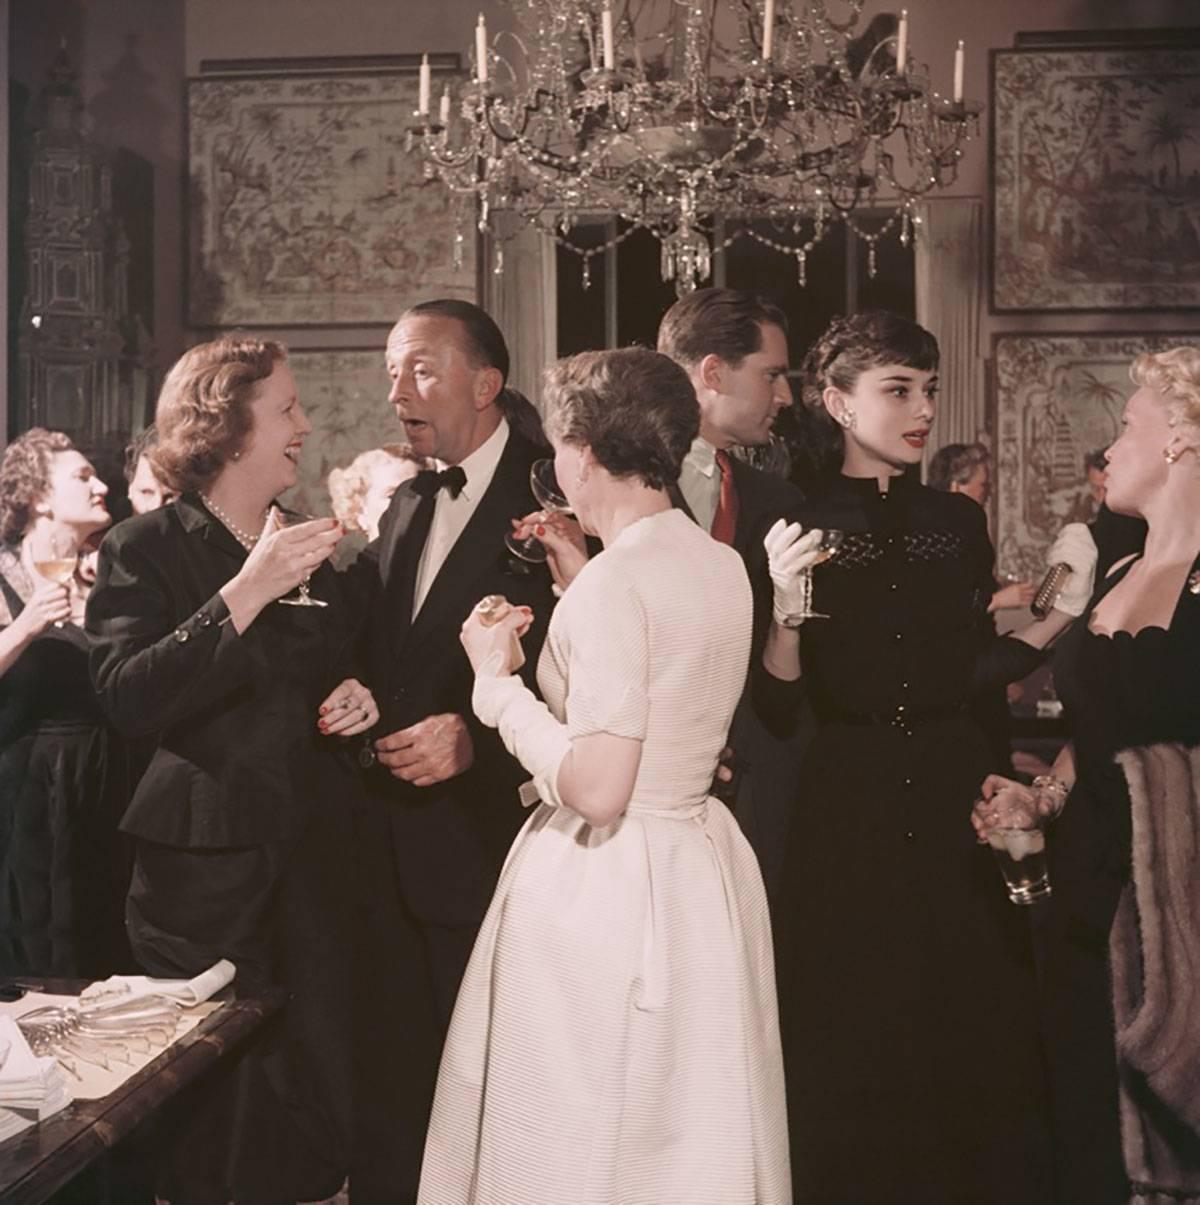 Californian Party, 1955
Chromogenic Lambda print
Estate stamped and hand numbered edition of 150 with certificate of authenticity from the estate. 

Belgian born actress Audrey Hepburn (1929 - 1993) socialising at a party in San Francisco.

Slim